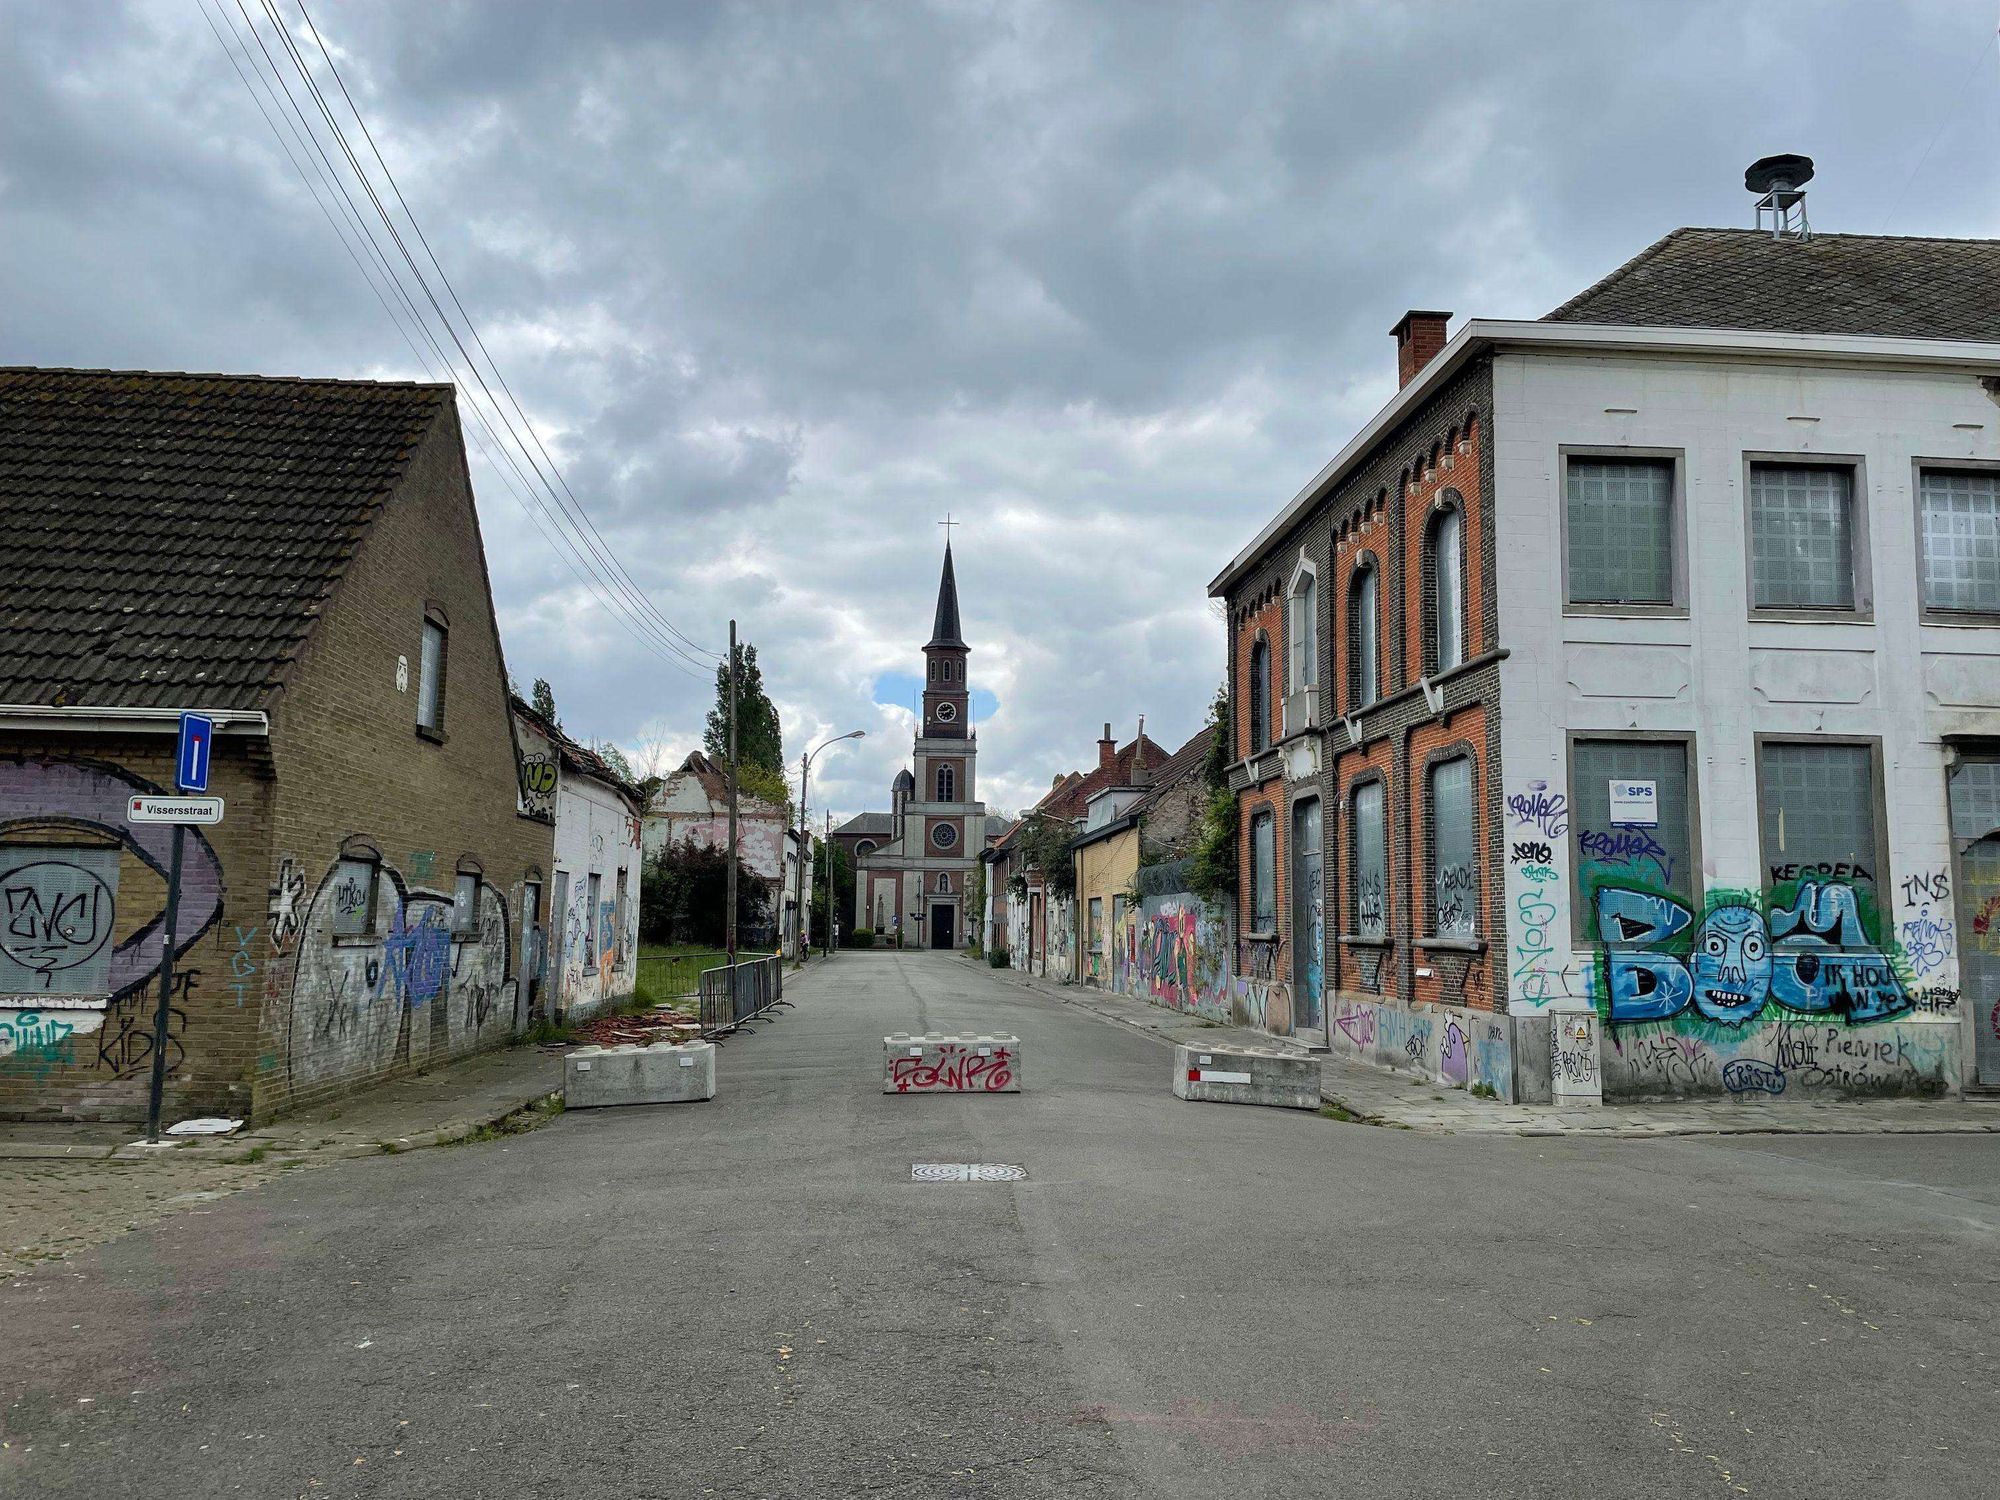 a photograph of the streets in the ghosttown of doel (spookstad doel). the photograph shows houses and the church